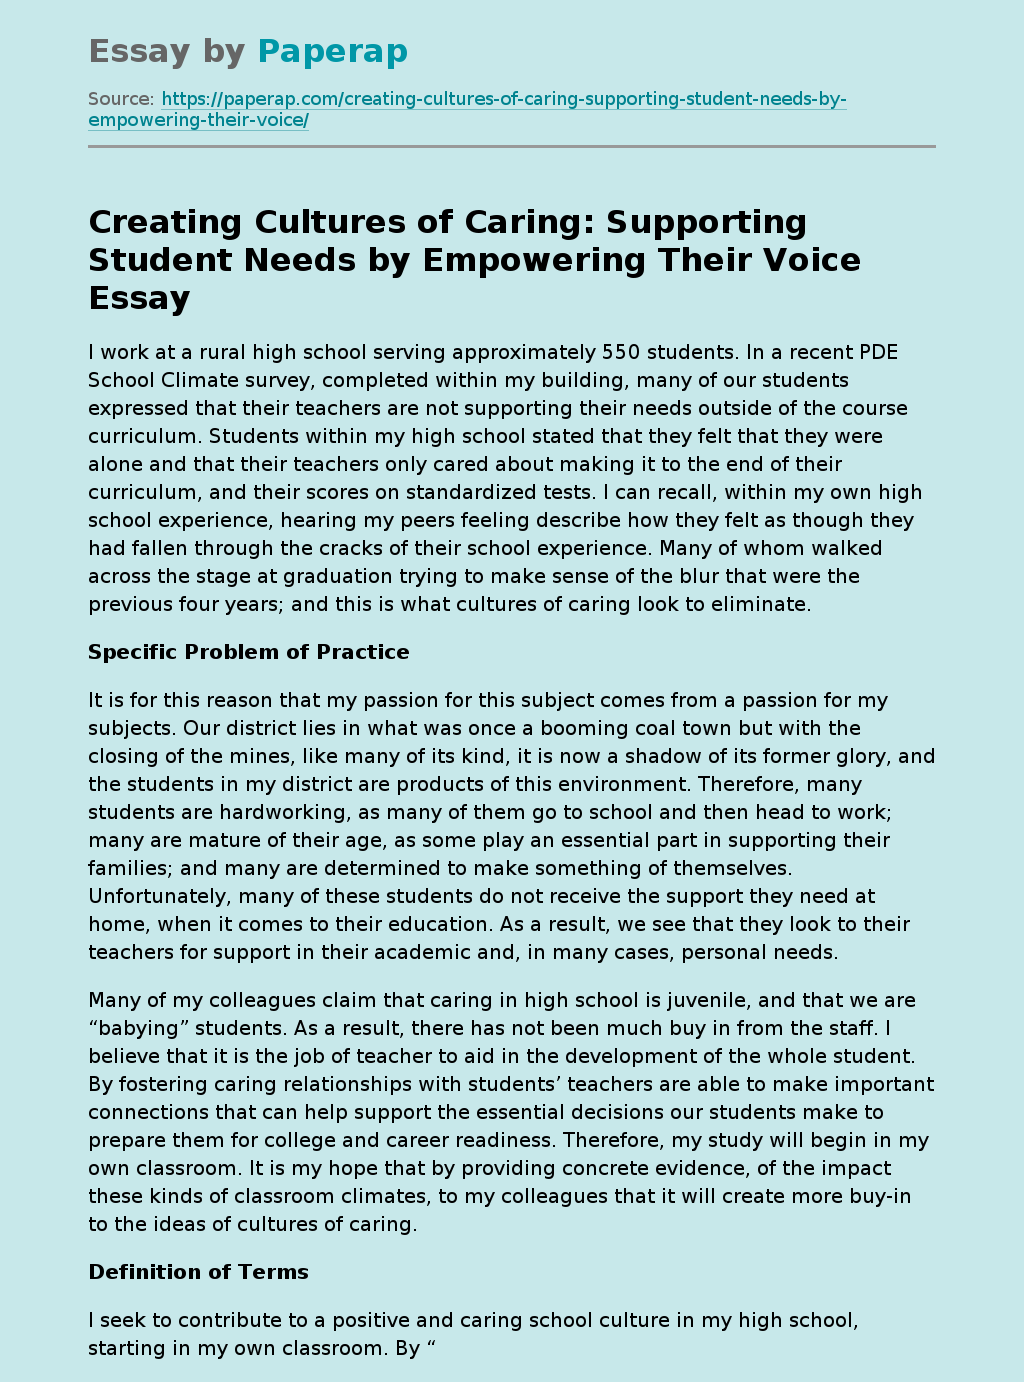 Creating Cultures of Caring: Supporting Student Needs by Empowering Their Voice